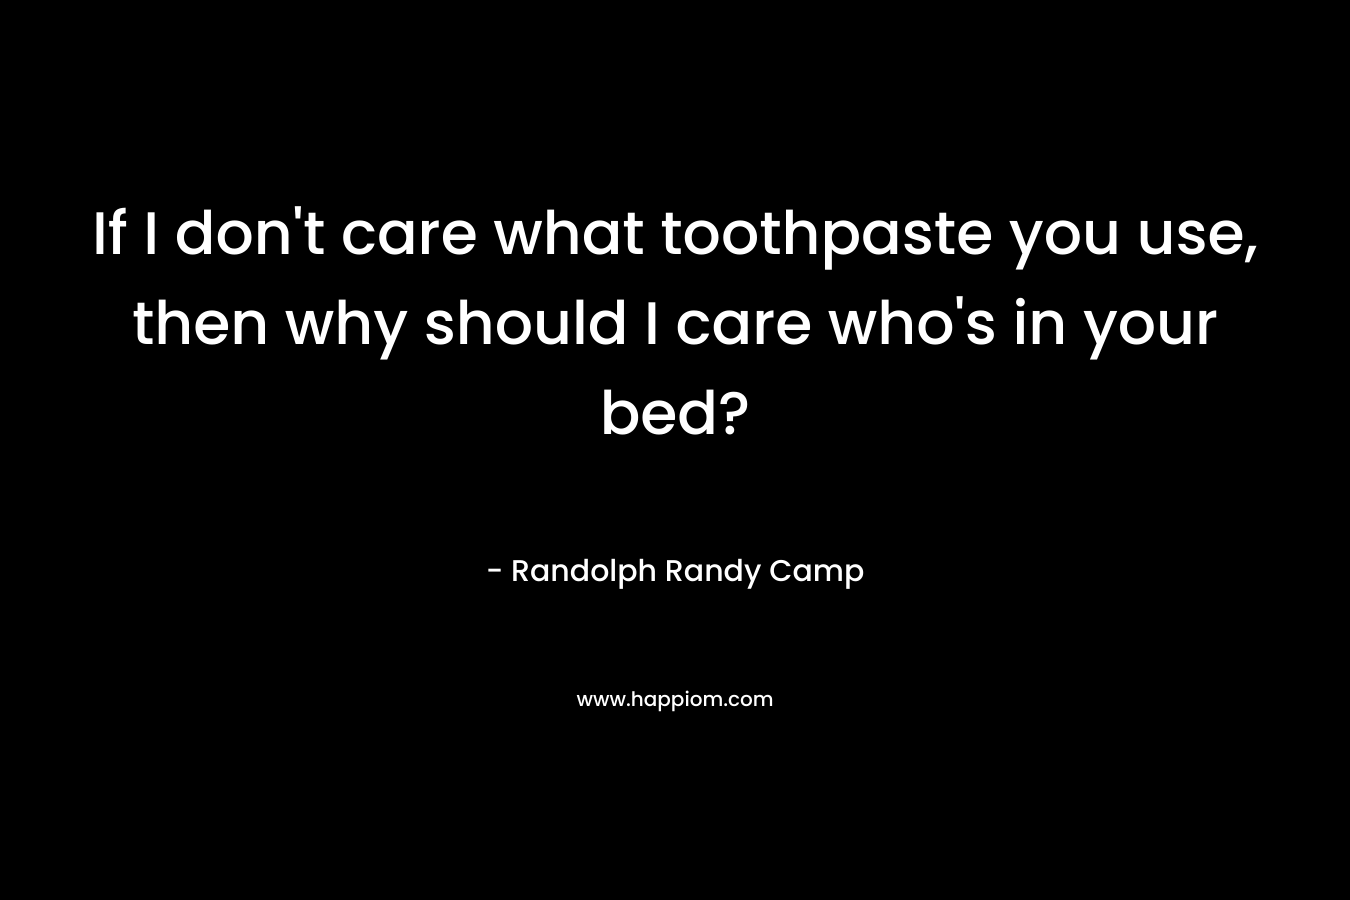 If I don't care what toothpaste you use, then why should I care who's in your bed?